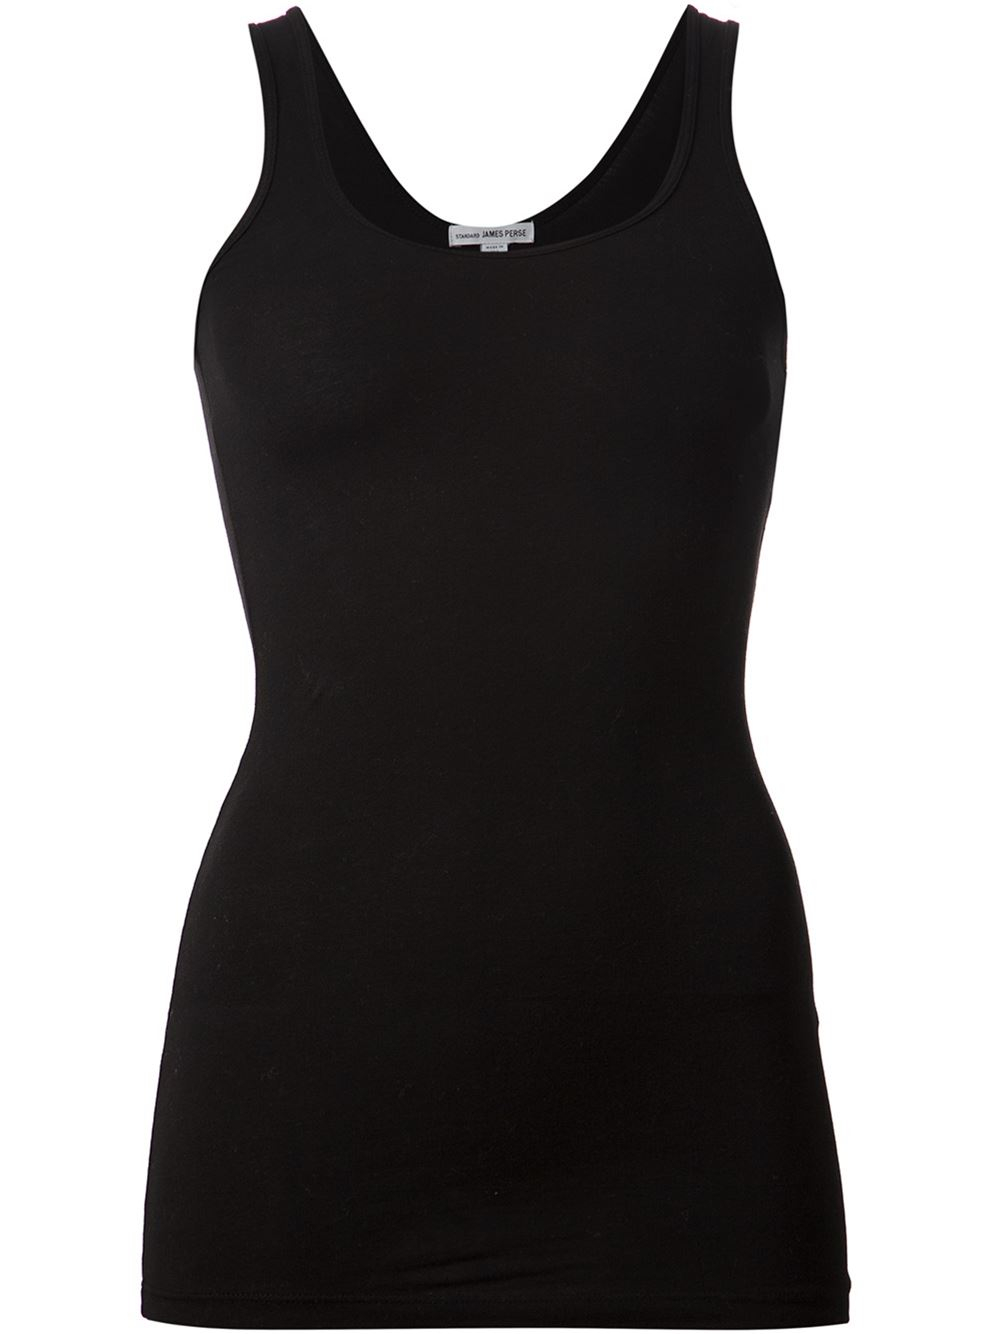 James Perse Long Fitted Tank Top in Black | Lyst